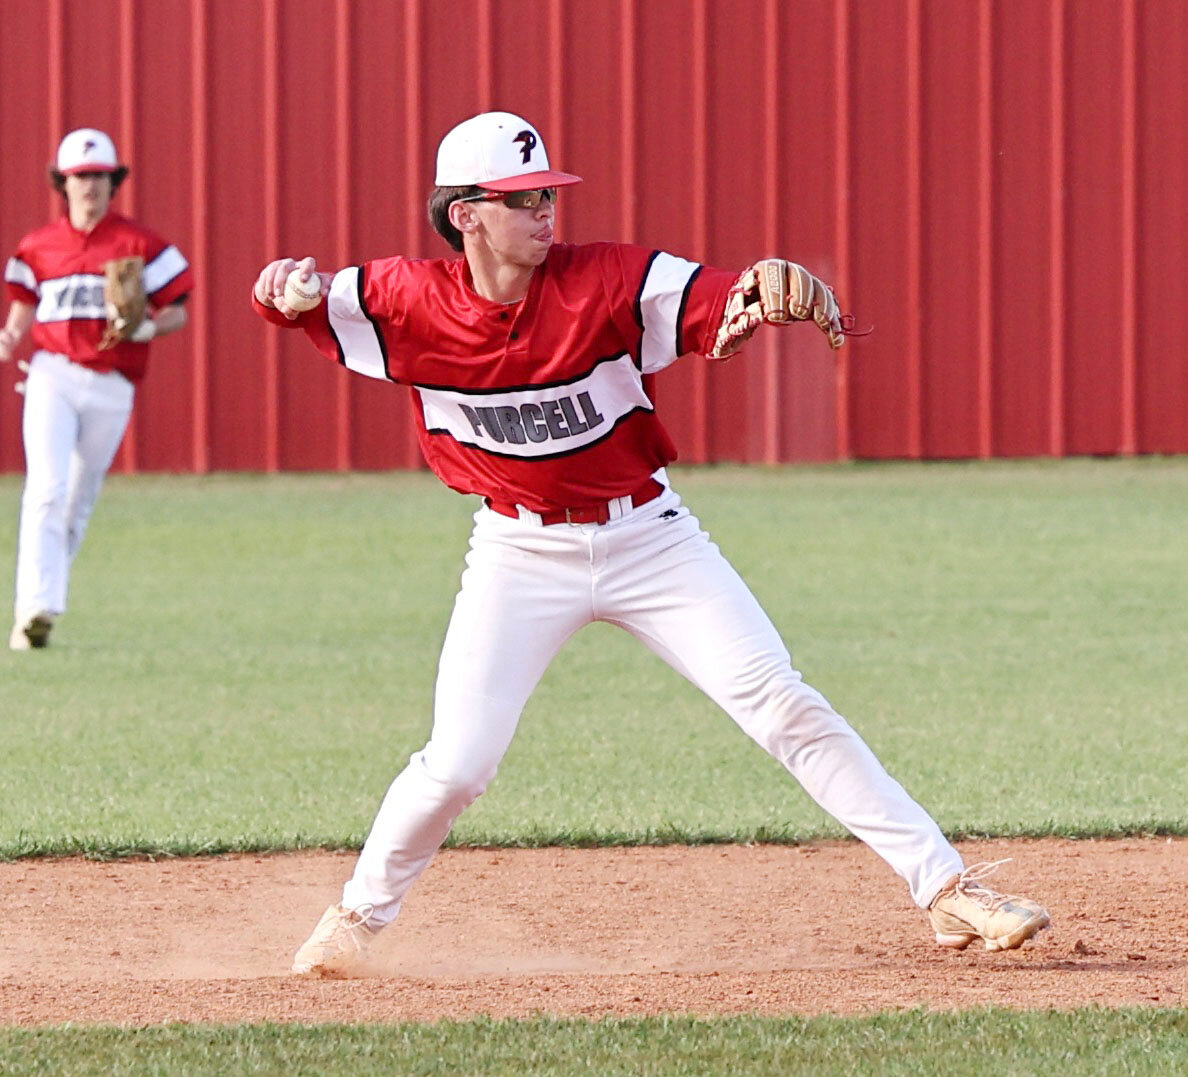 Purcell sophomore Parker Page makes a throw from second base to first for an out during the CHA game. Purcell won 8-7 in 10 innings.